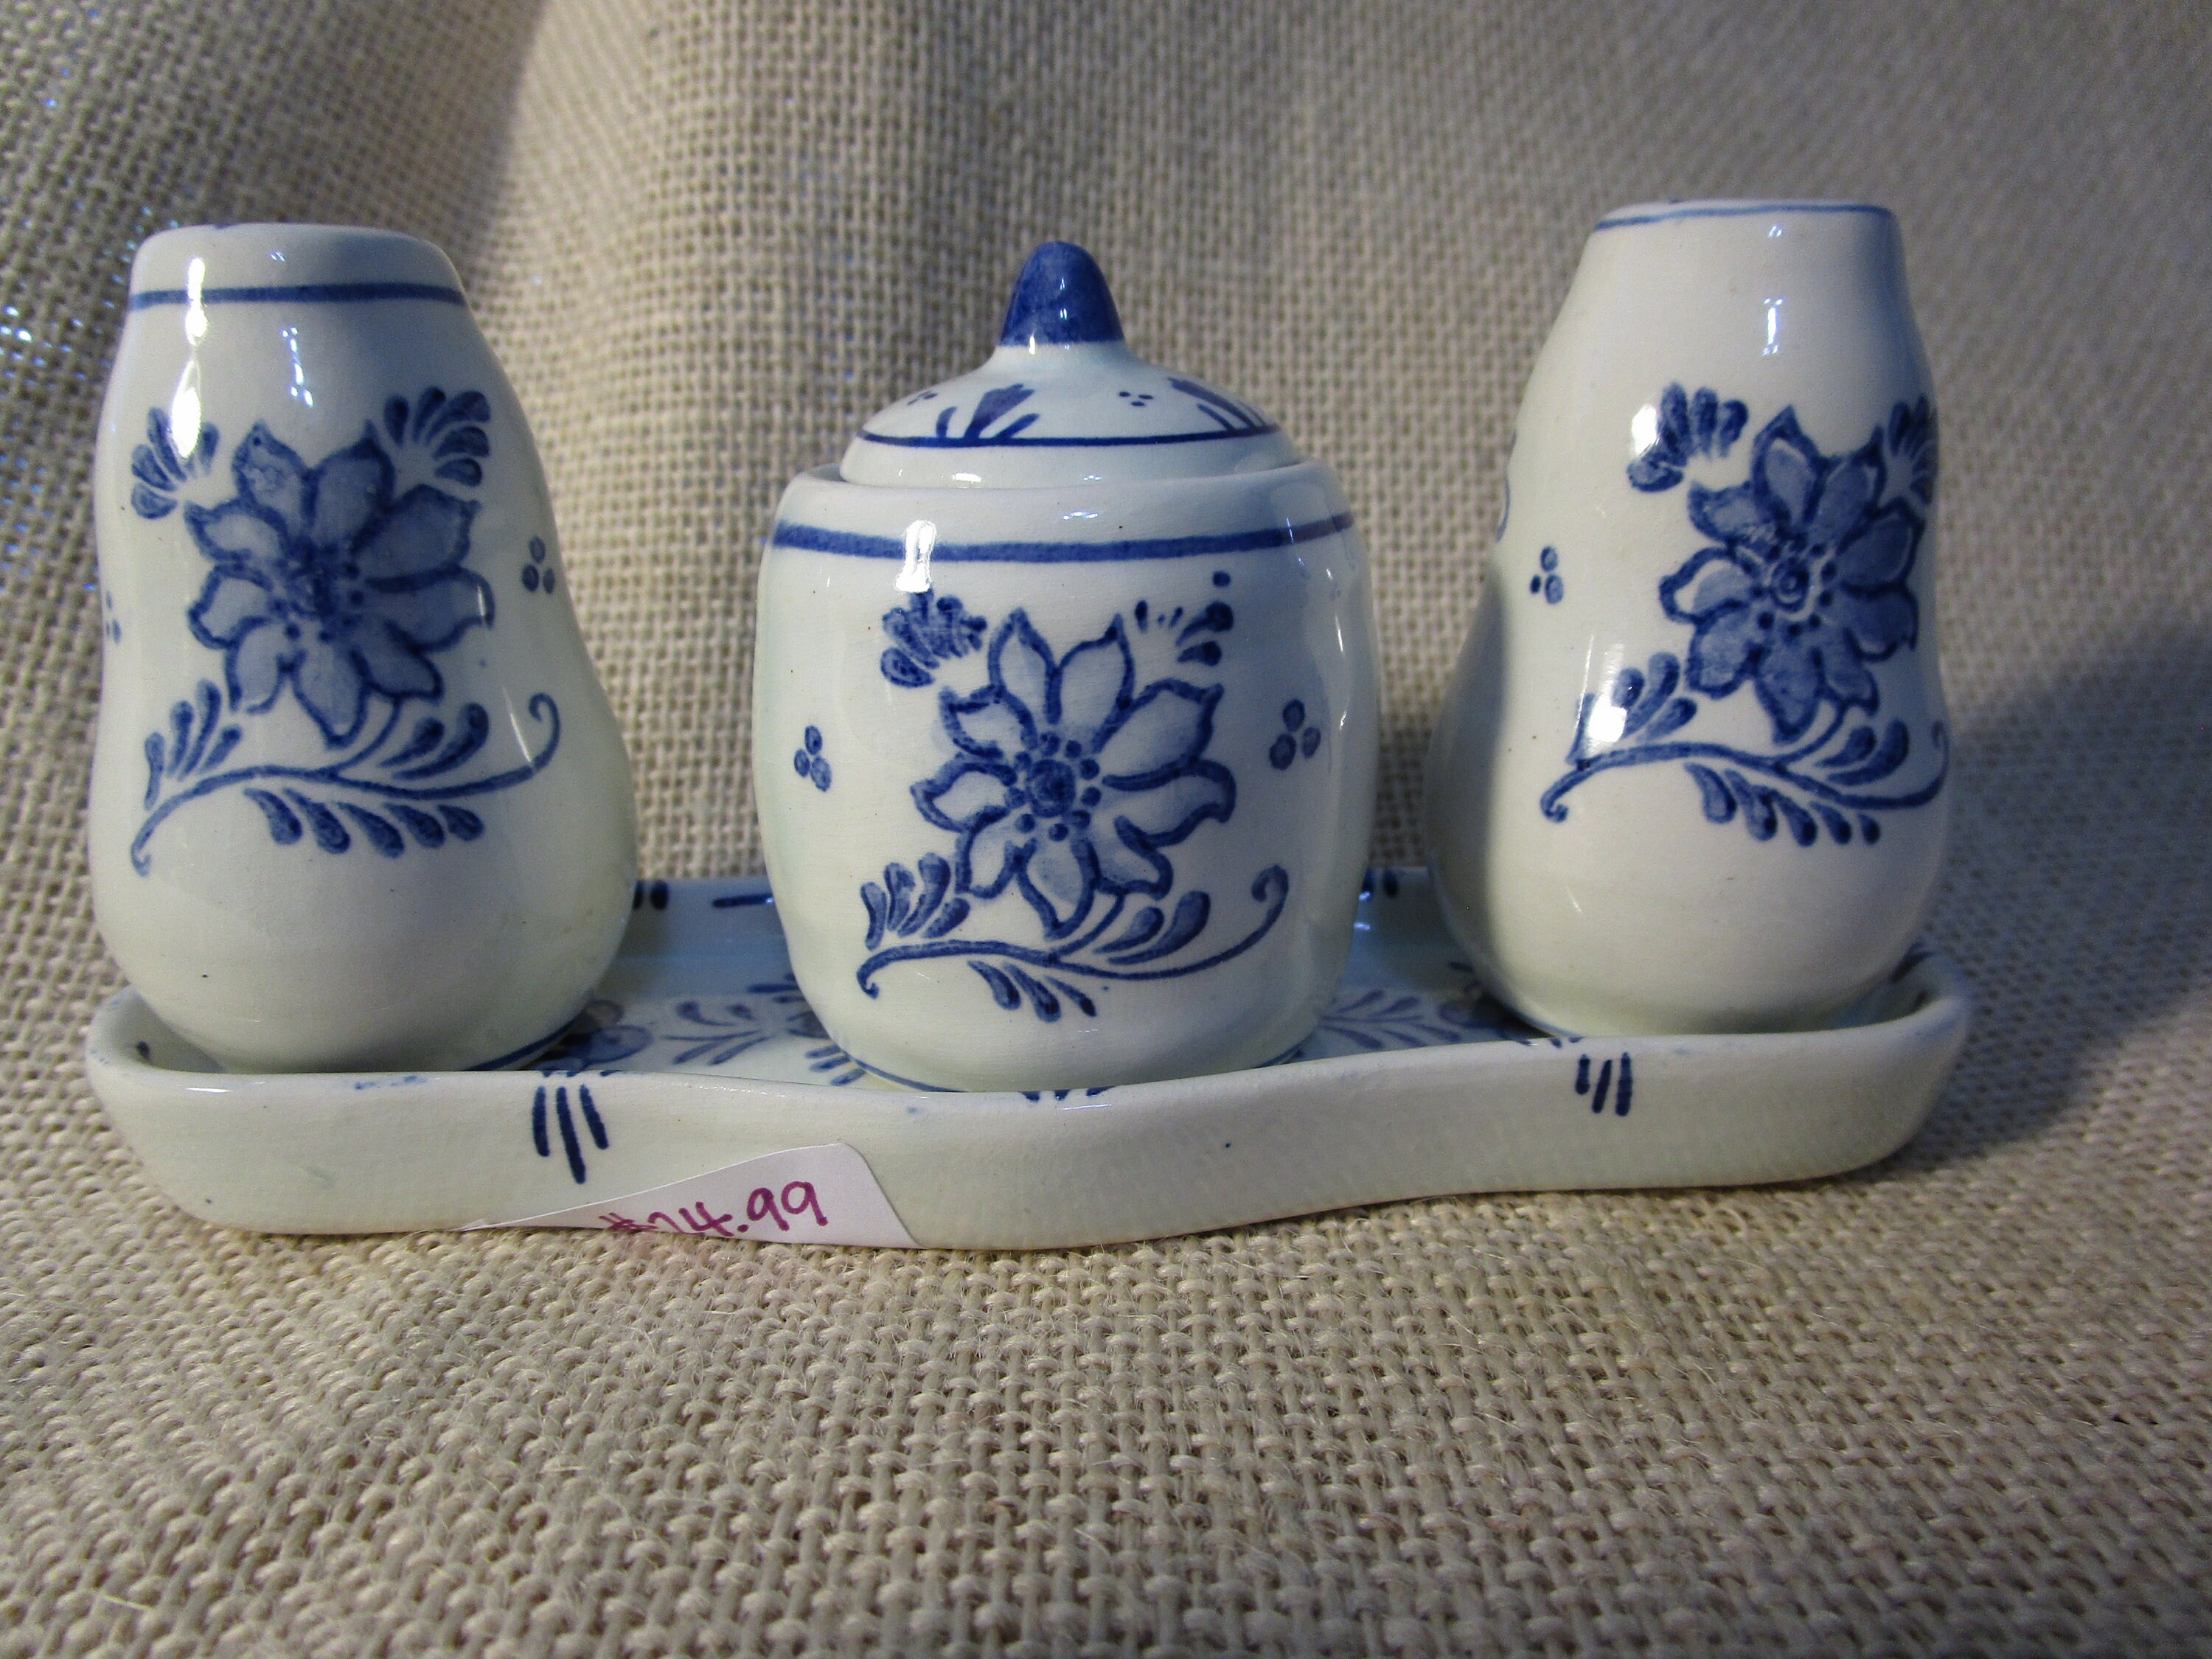 Salt and Pepper Shaker Condiment Set, Mustard Pot, With Spoon, Manufactured  in Limoges, France, White Porcelain Company Deshoulieres 